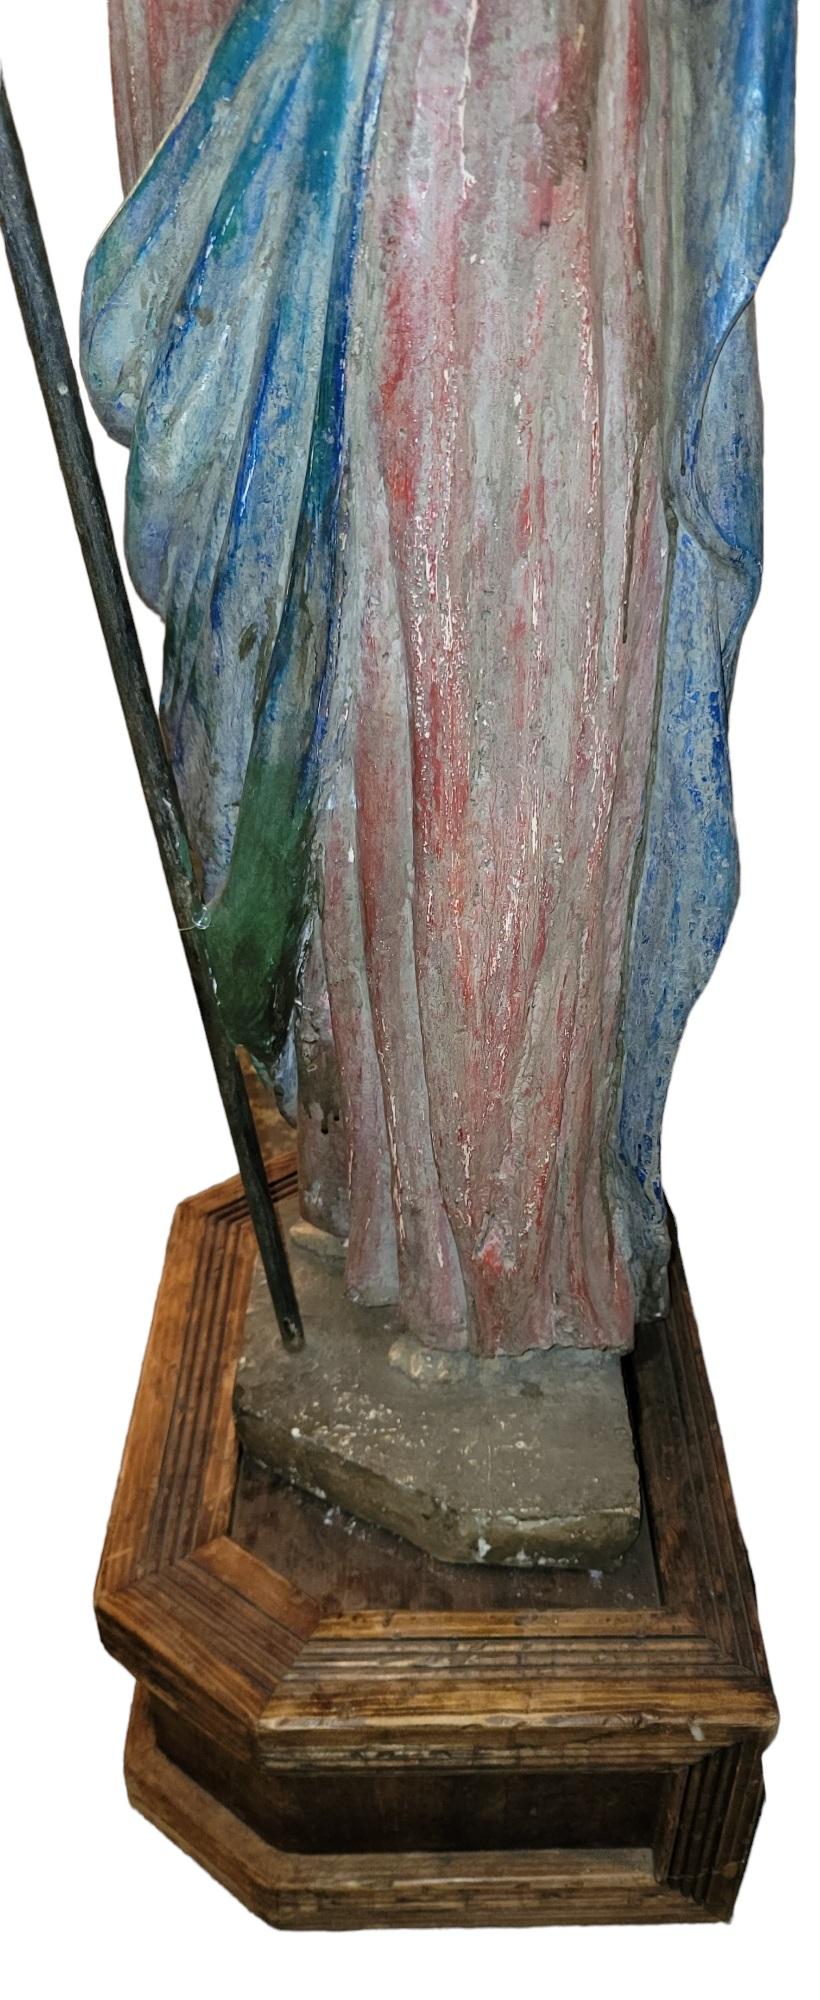 Italian Wood porcelain and metal hand made in original paint Antique Santo Baptiste Sculpture w/stand 65 high x 17 deep x 20 wide 

Jean Baptiste with custom made stand. The left hand/arm of this statue hold a staff. St. Jean was he cousin of